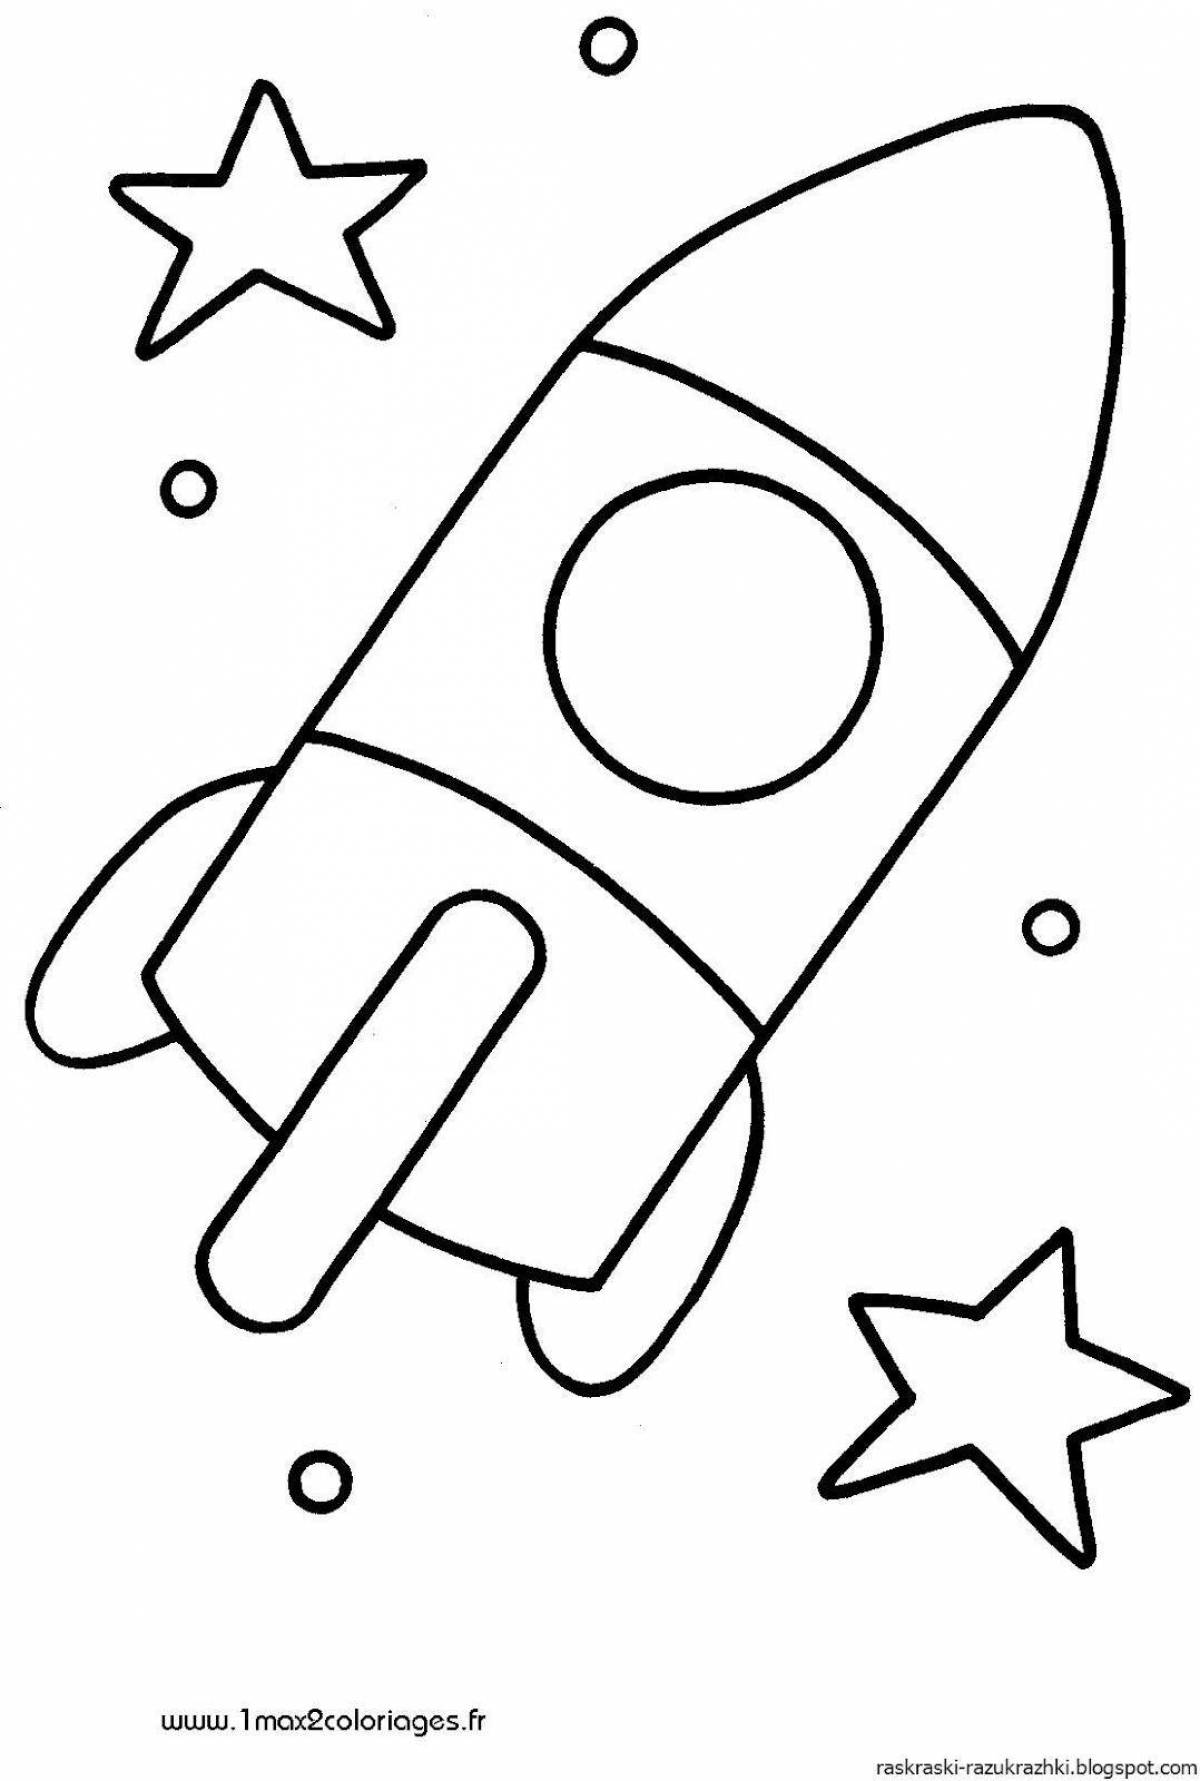 Outstanding rocket drawing for kids